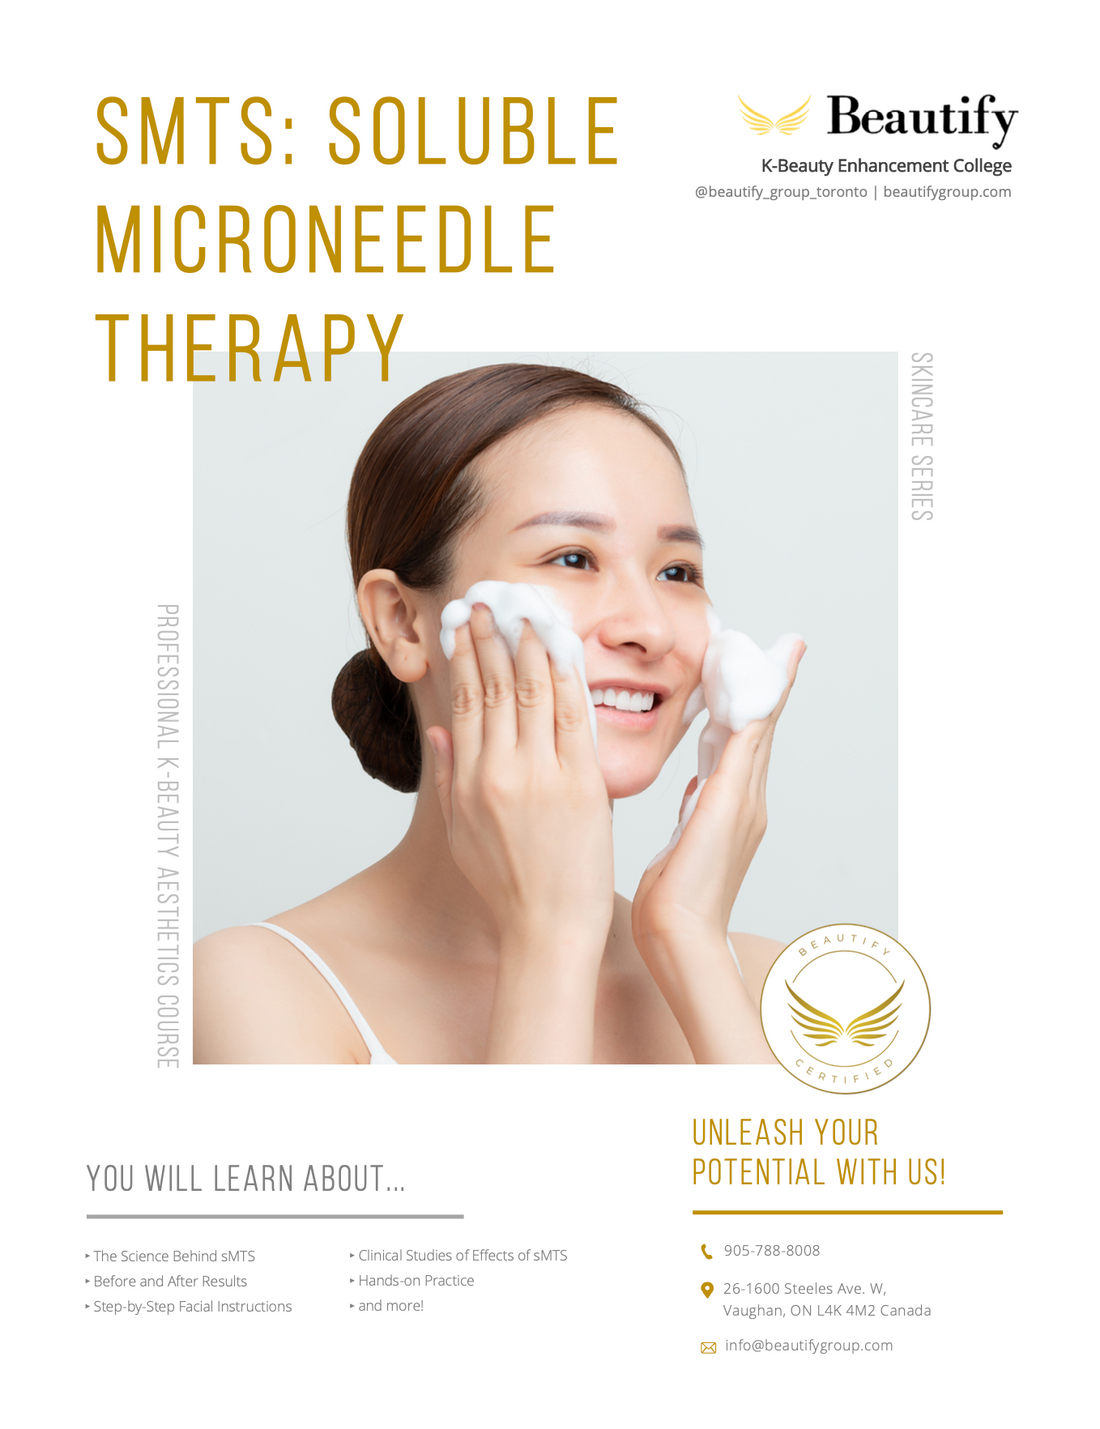 sMTS: Soluble Microneedle Therapy Course